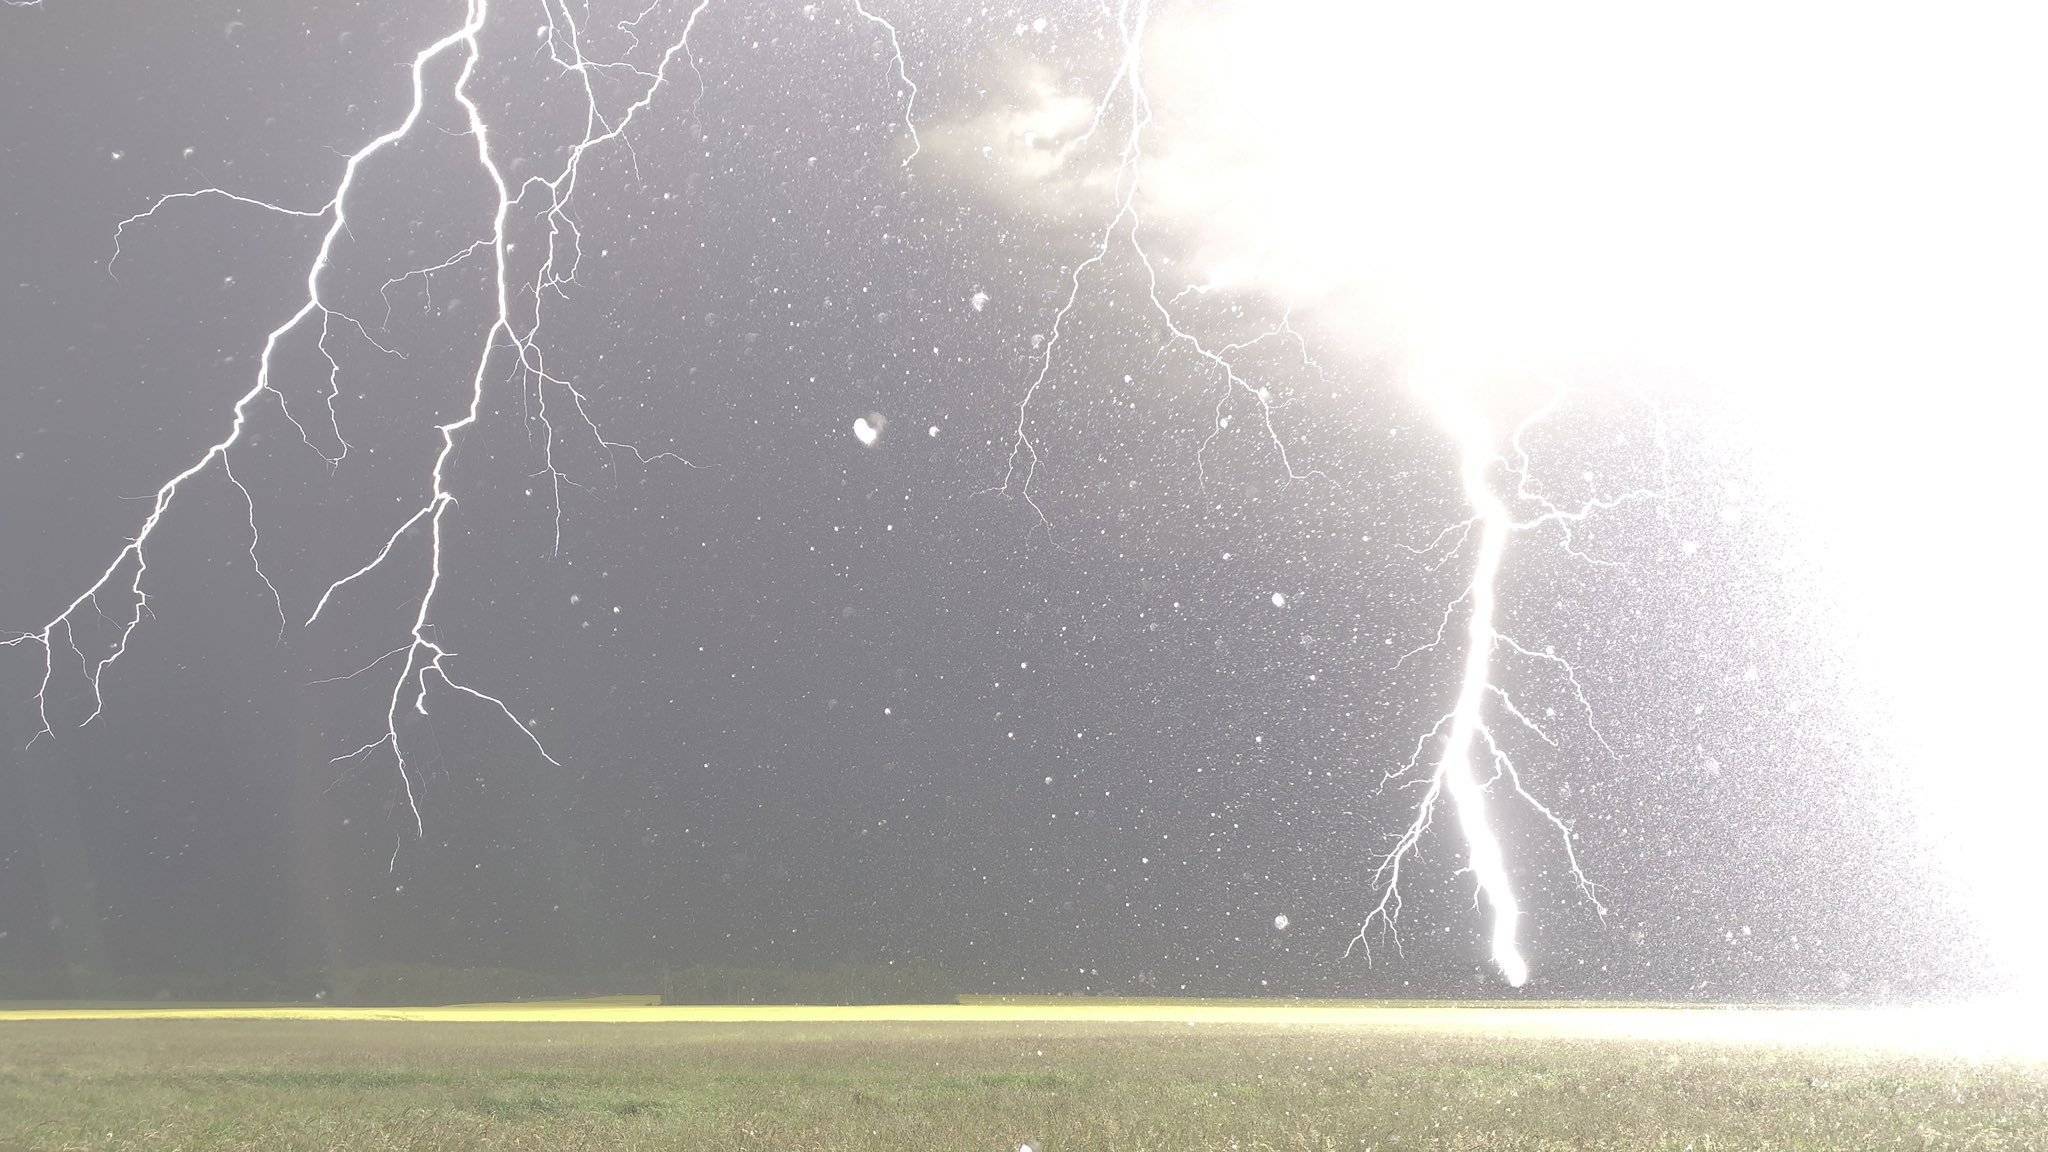 ABSOLUTE INSANITY west of Millet at 1:50AM in Alberta by Jeff Adams @jeffmadams